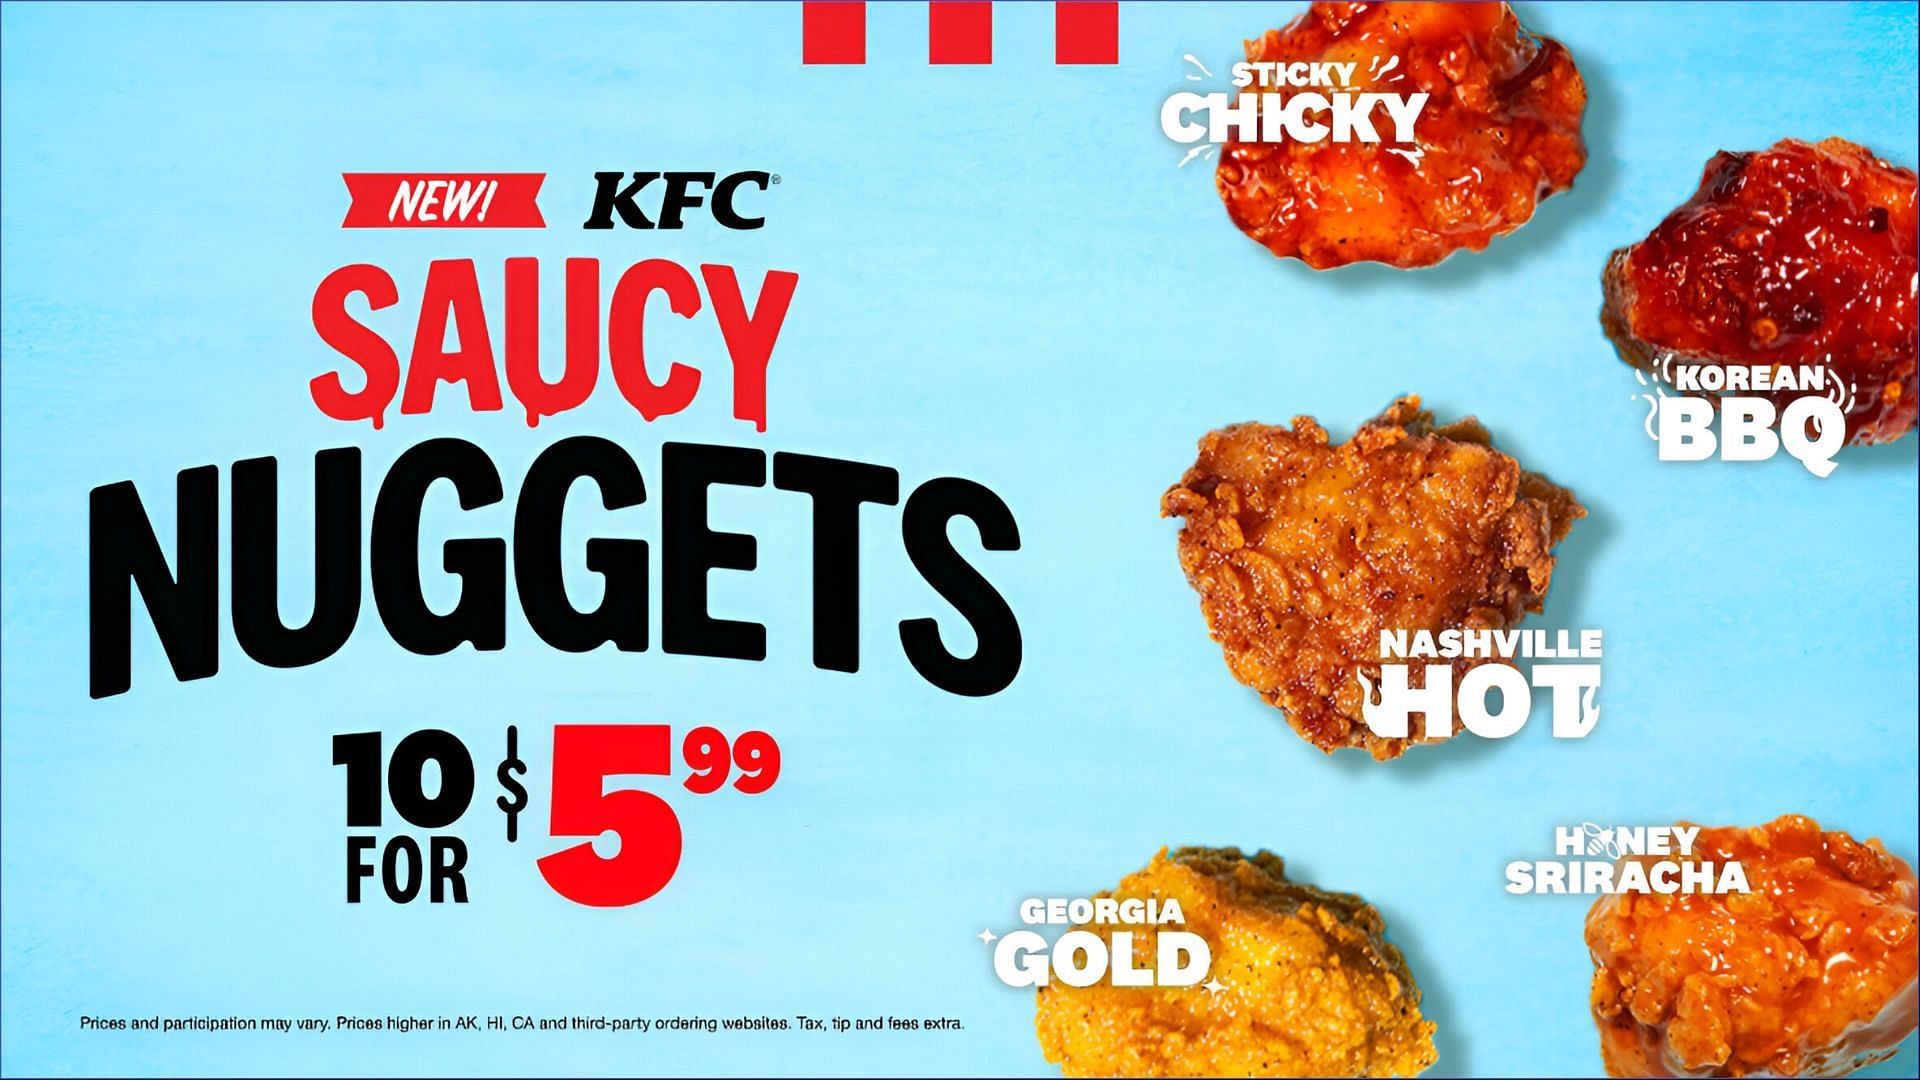 The saucy chicken nuggets come as a 10-piece offering for $5.99 (Image via KFC)